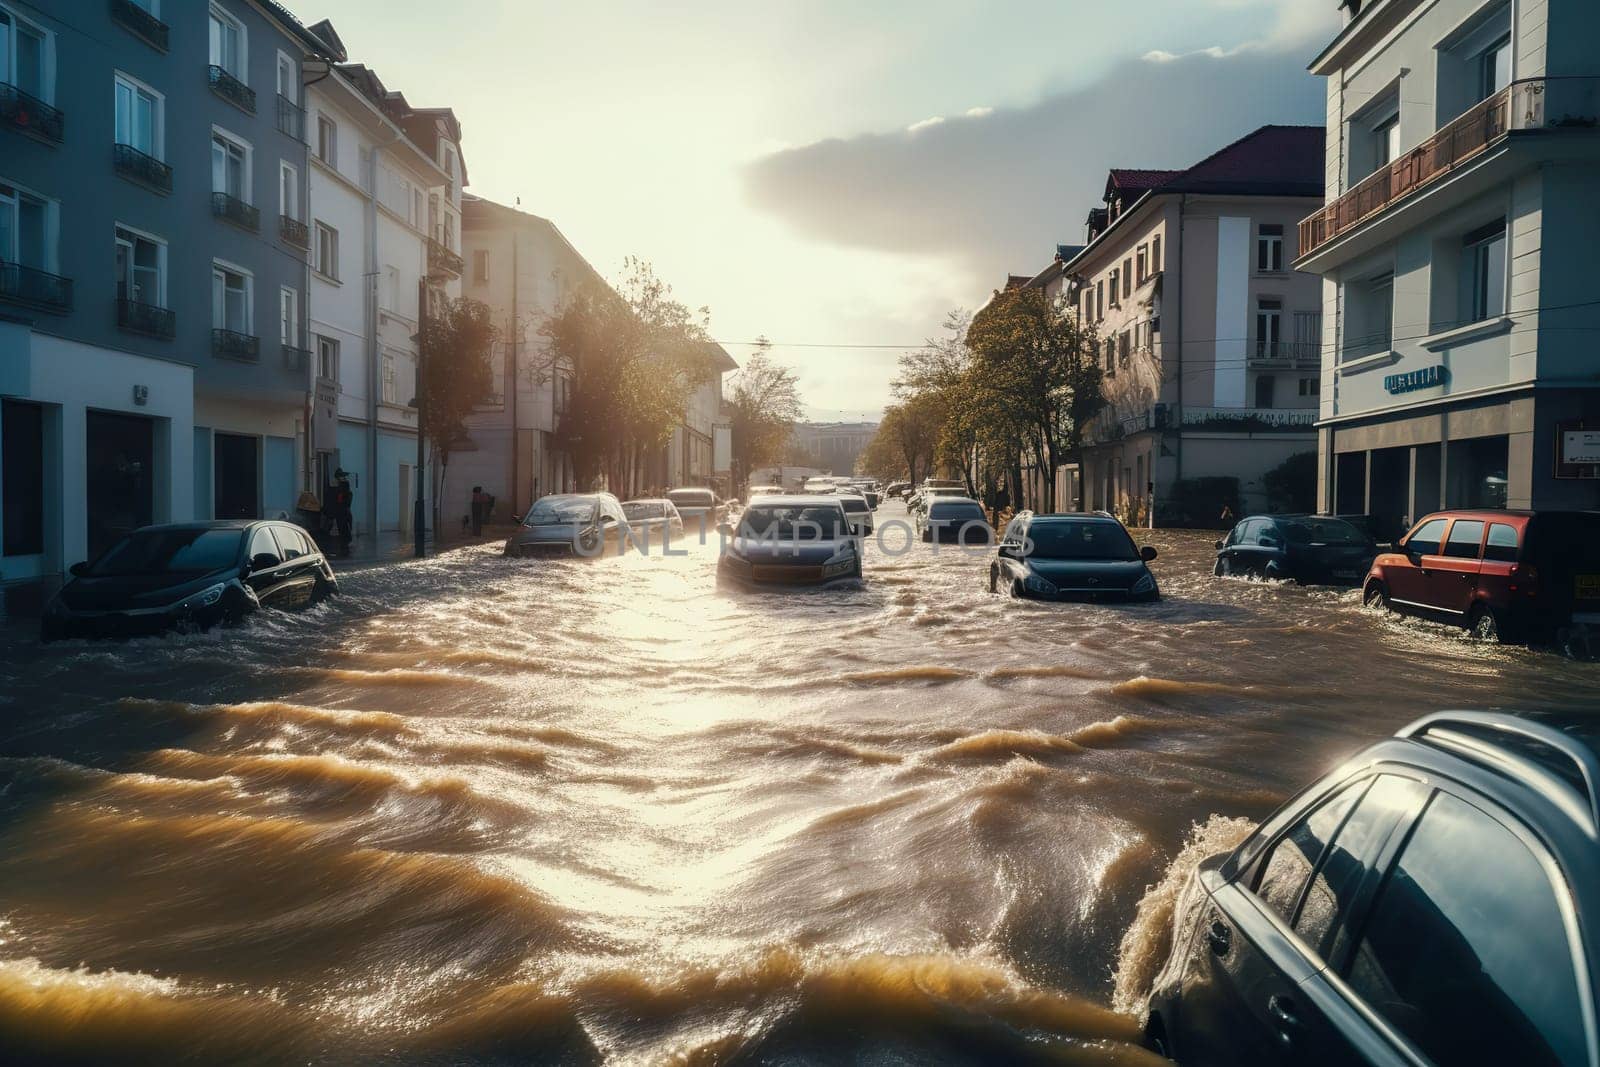 Cars in flooded european city street by dimol